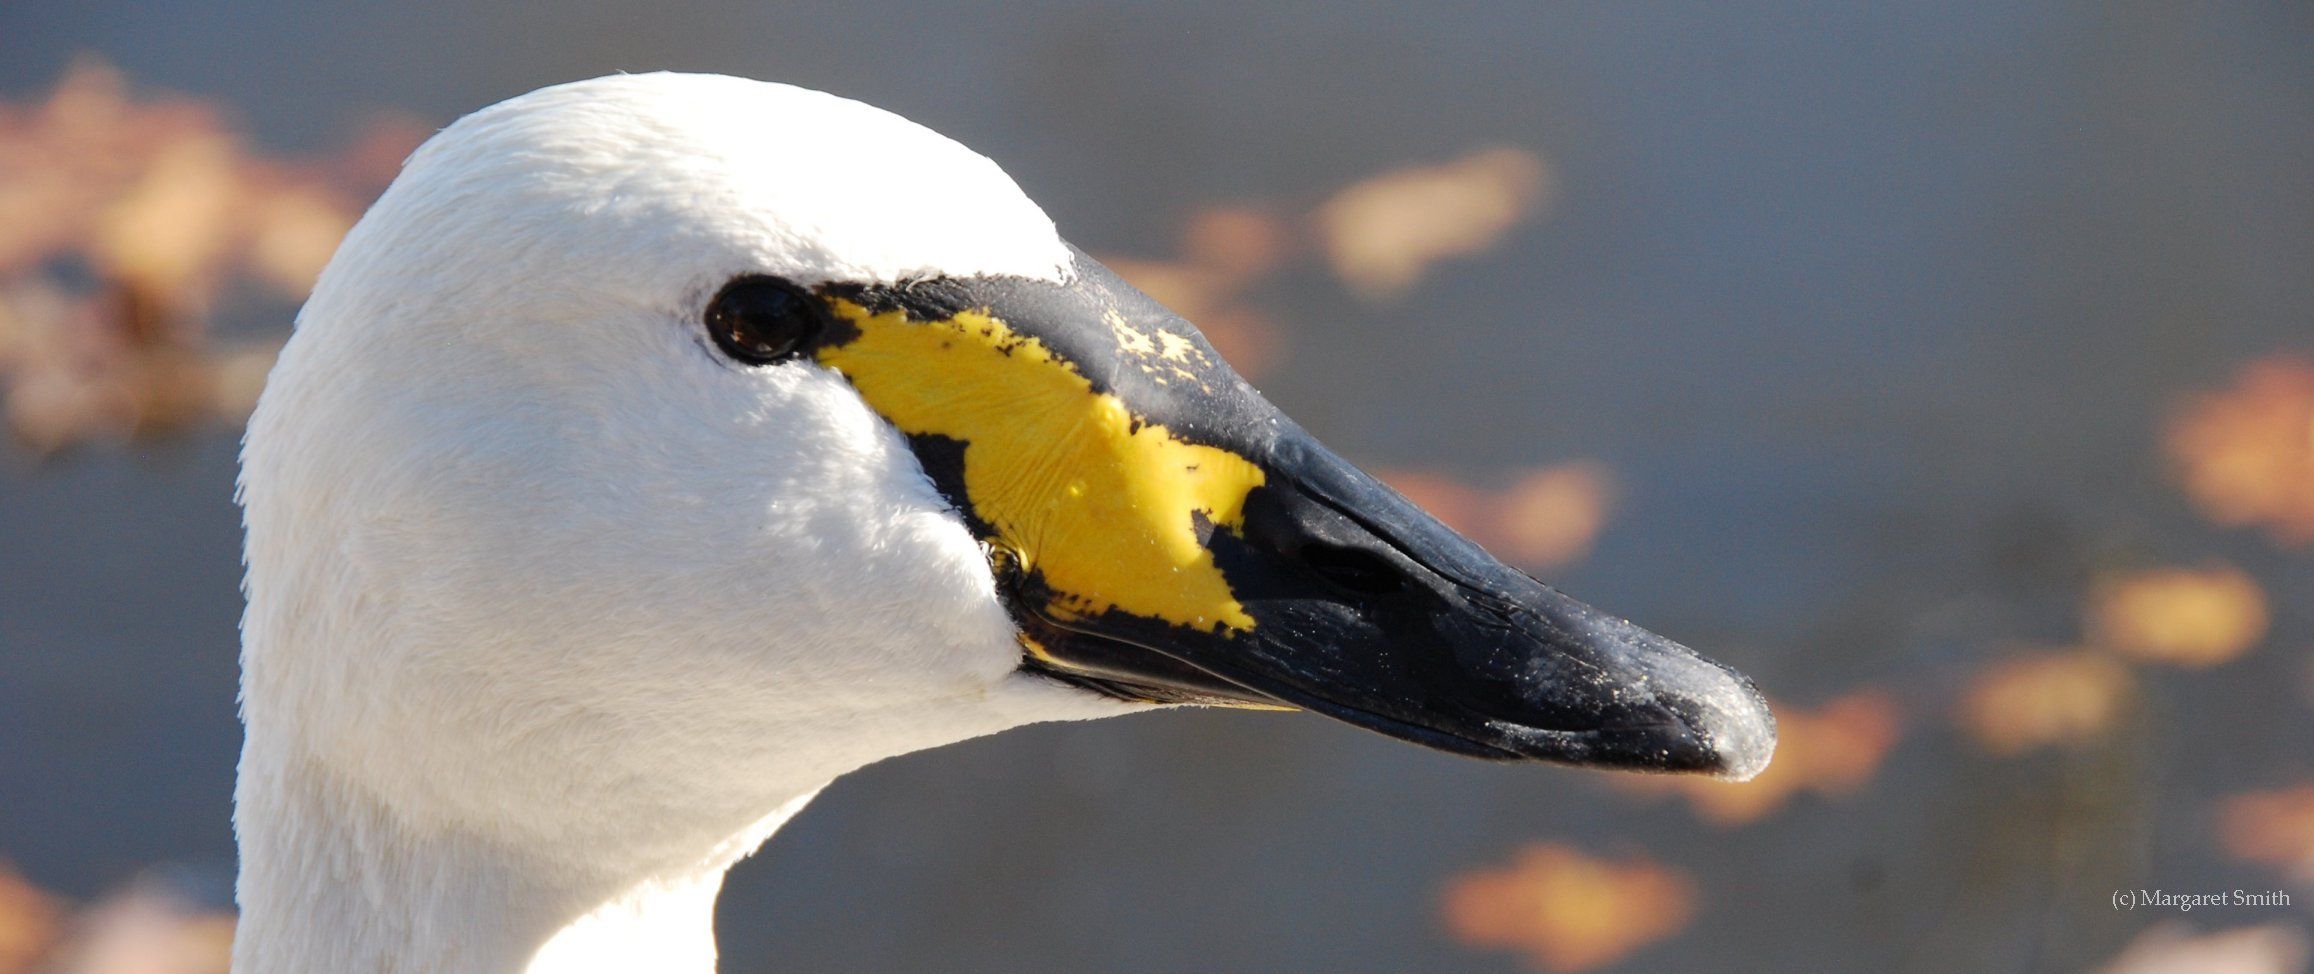 Check out our International Swan Links for information about the world's seven swan species